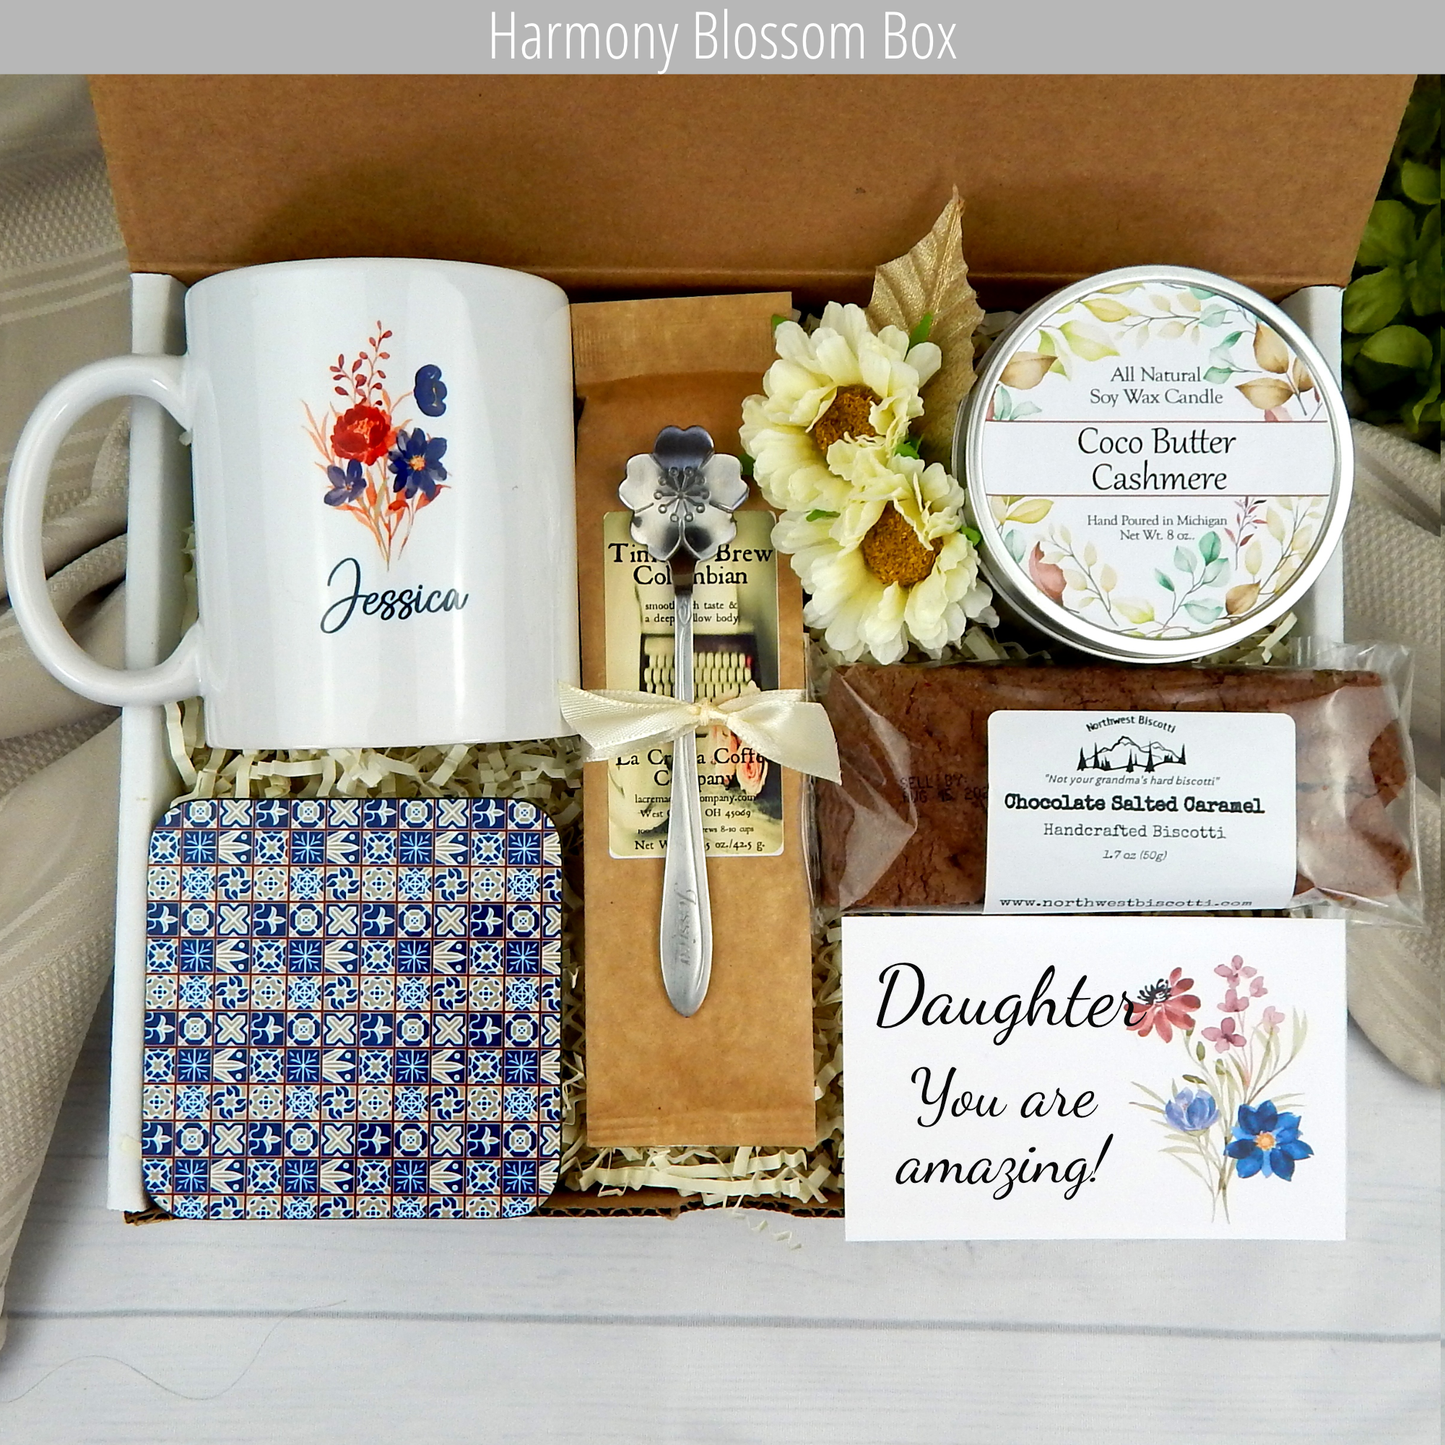 Celebrate special moments: Personalized name mug, candle, engraved spoon, biscotti, and coffee in a daughter's gift basket.